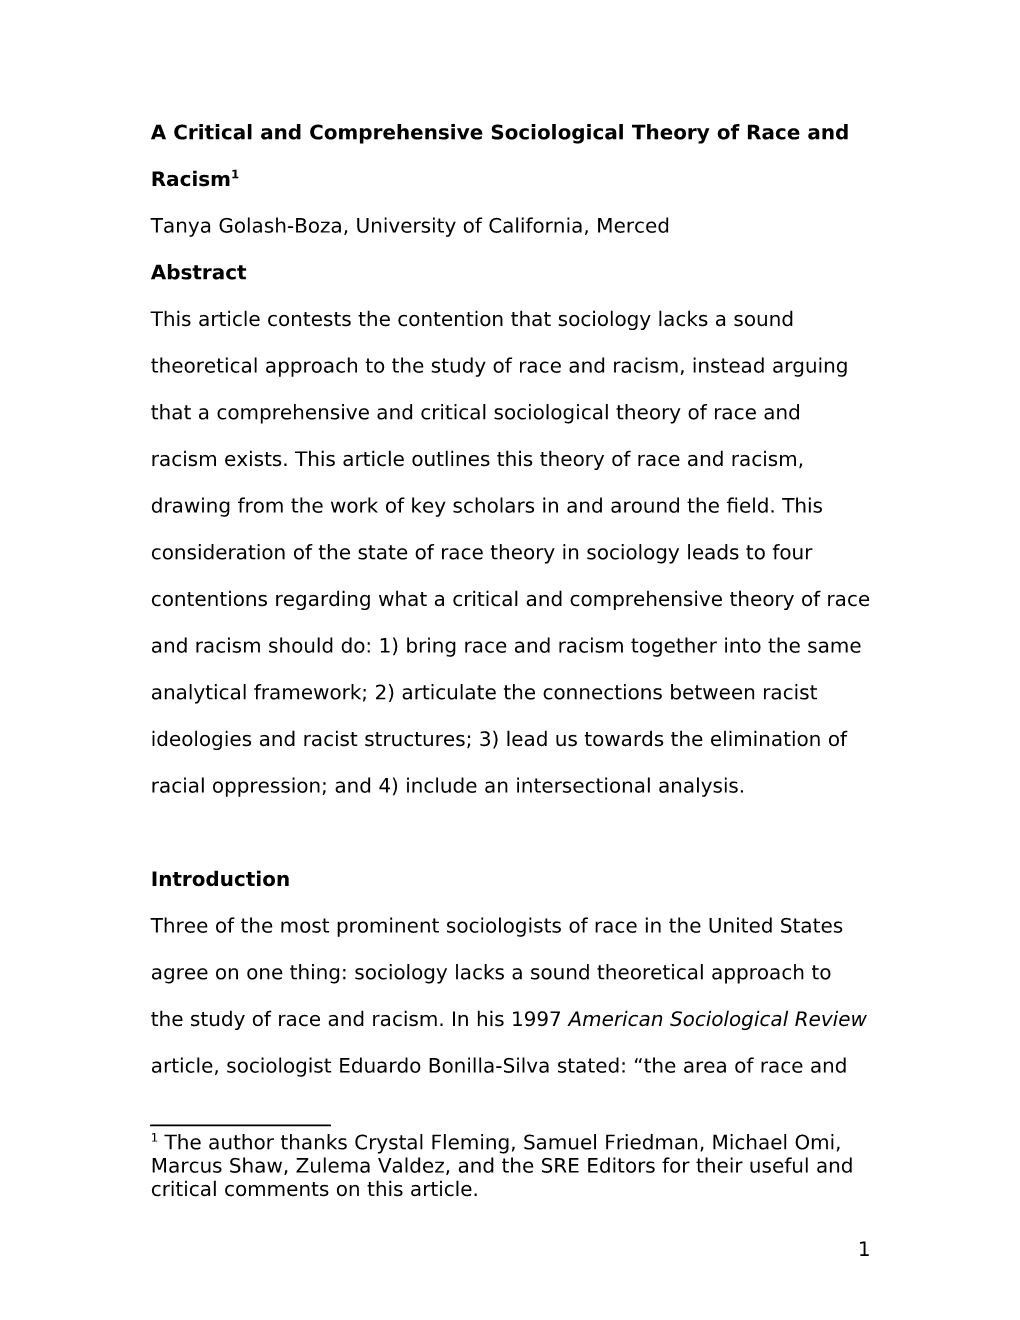 A Critical and Comprehensive Sociological Theory of Race and Racism1 Tanya Golash-Boza, University of California, Merced Abstrac